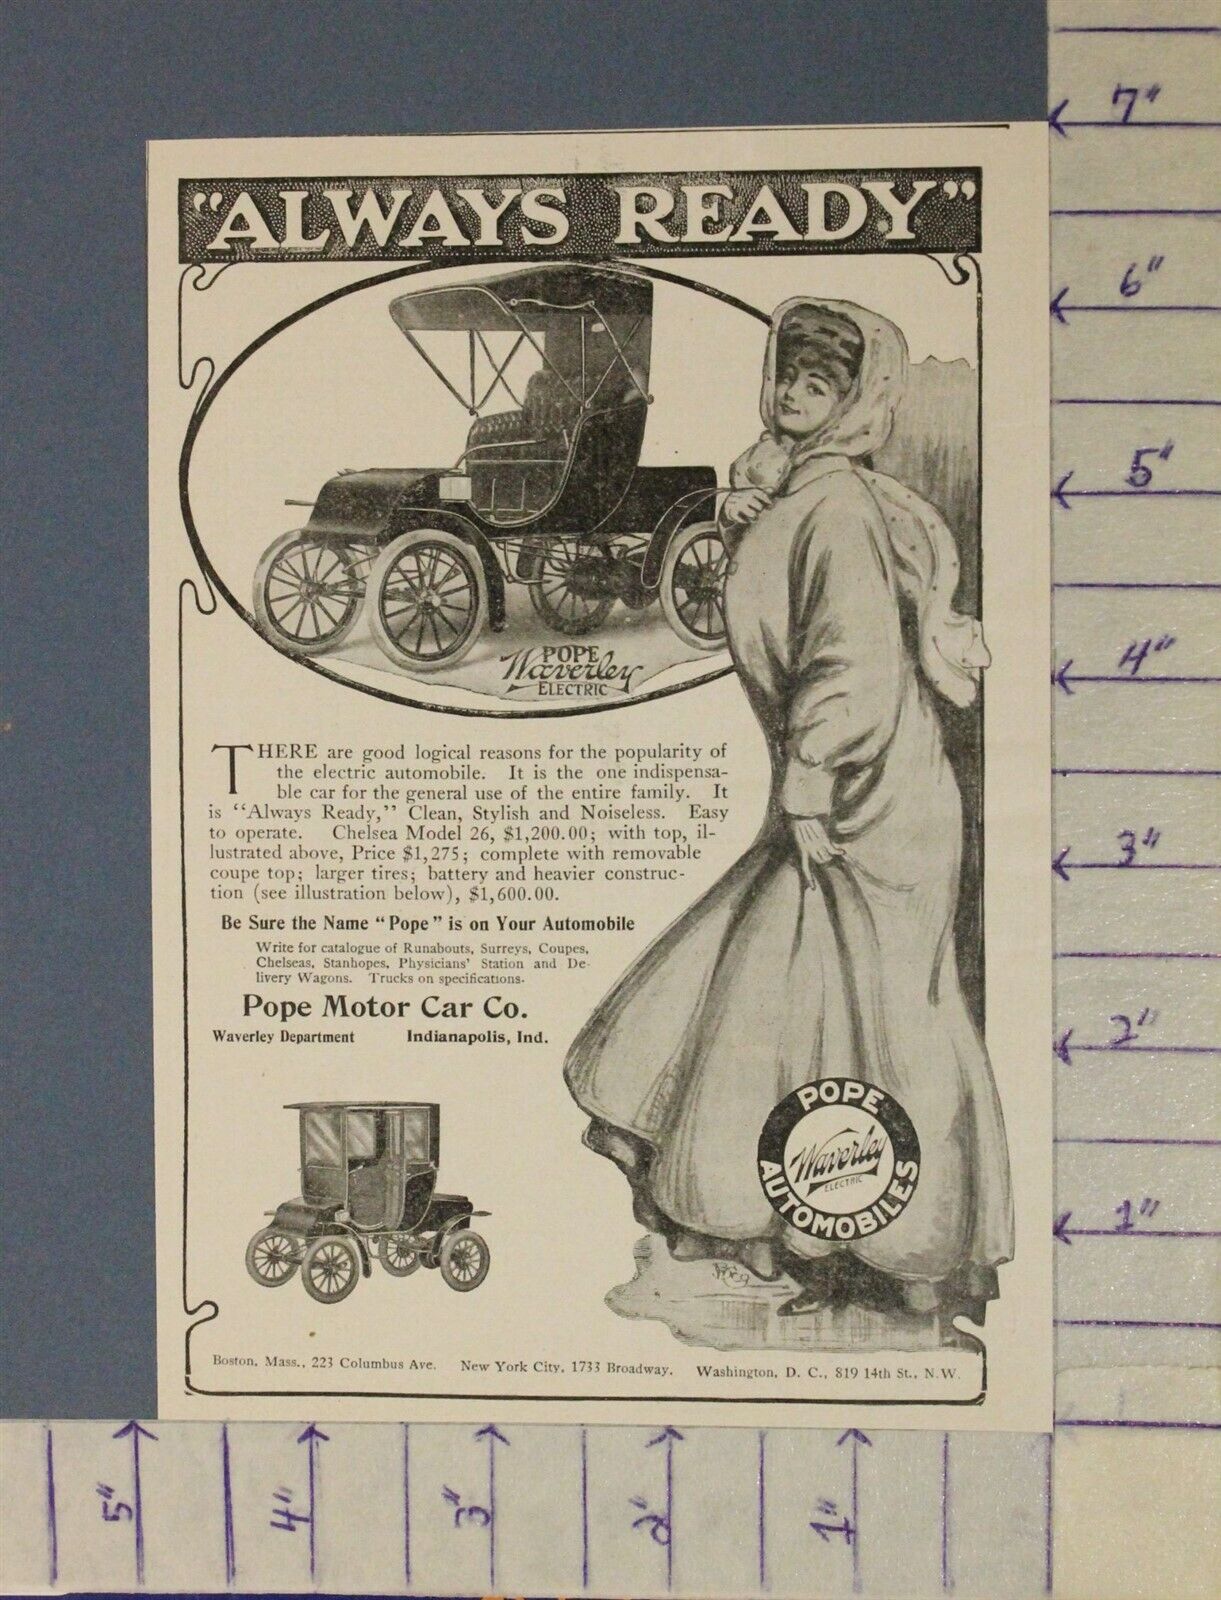 1906 POPE WAVERLY ELECTRIC CAR AUTO GIRL BEAUTY SHOP DECOR HISTORIC AD A-2058